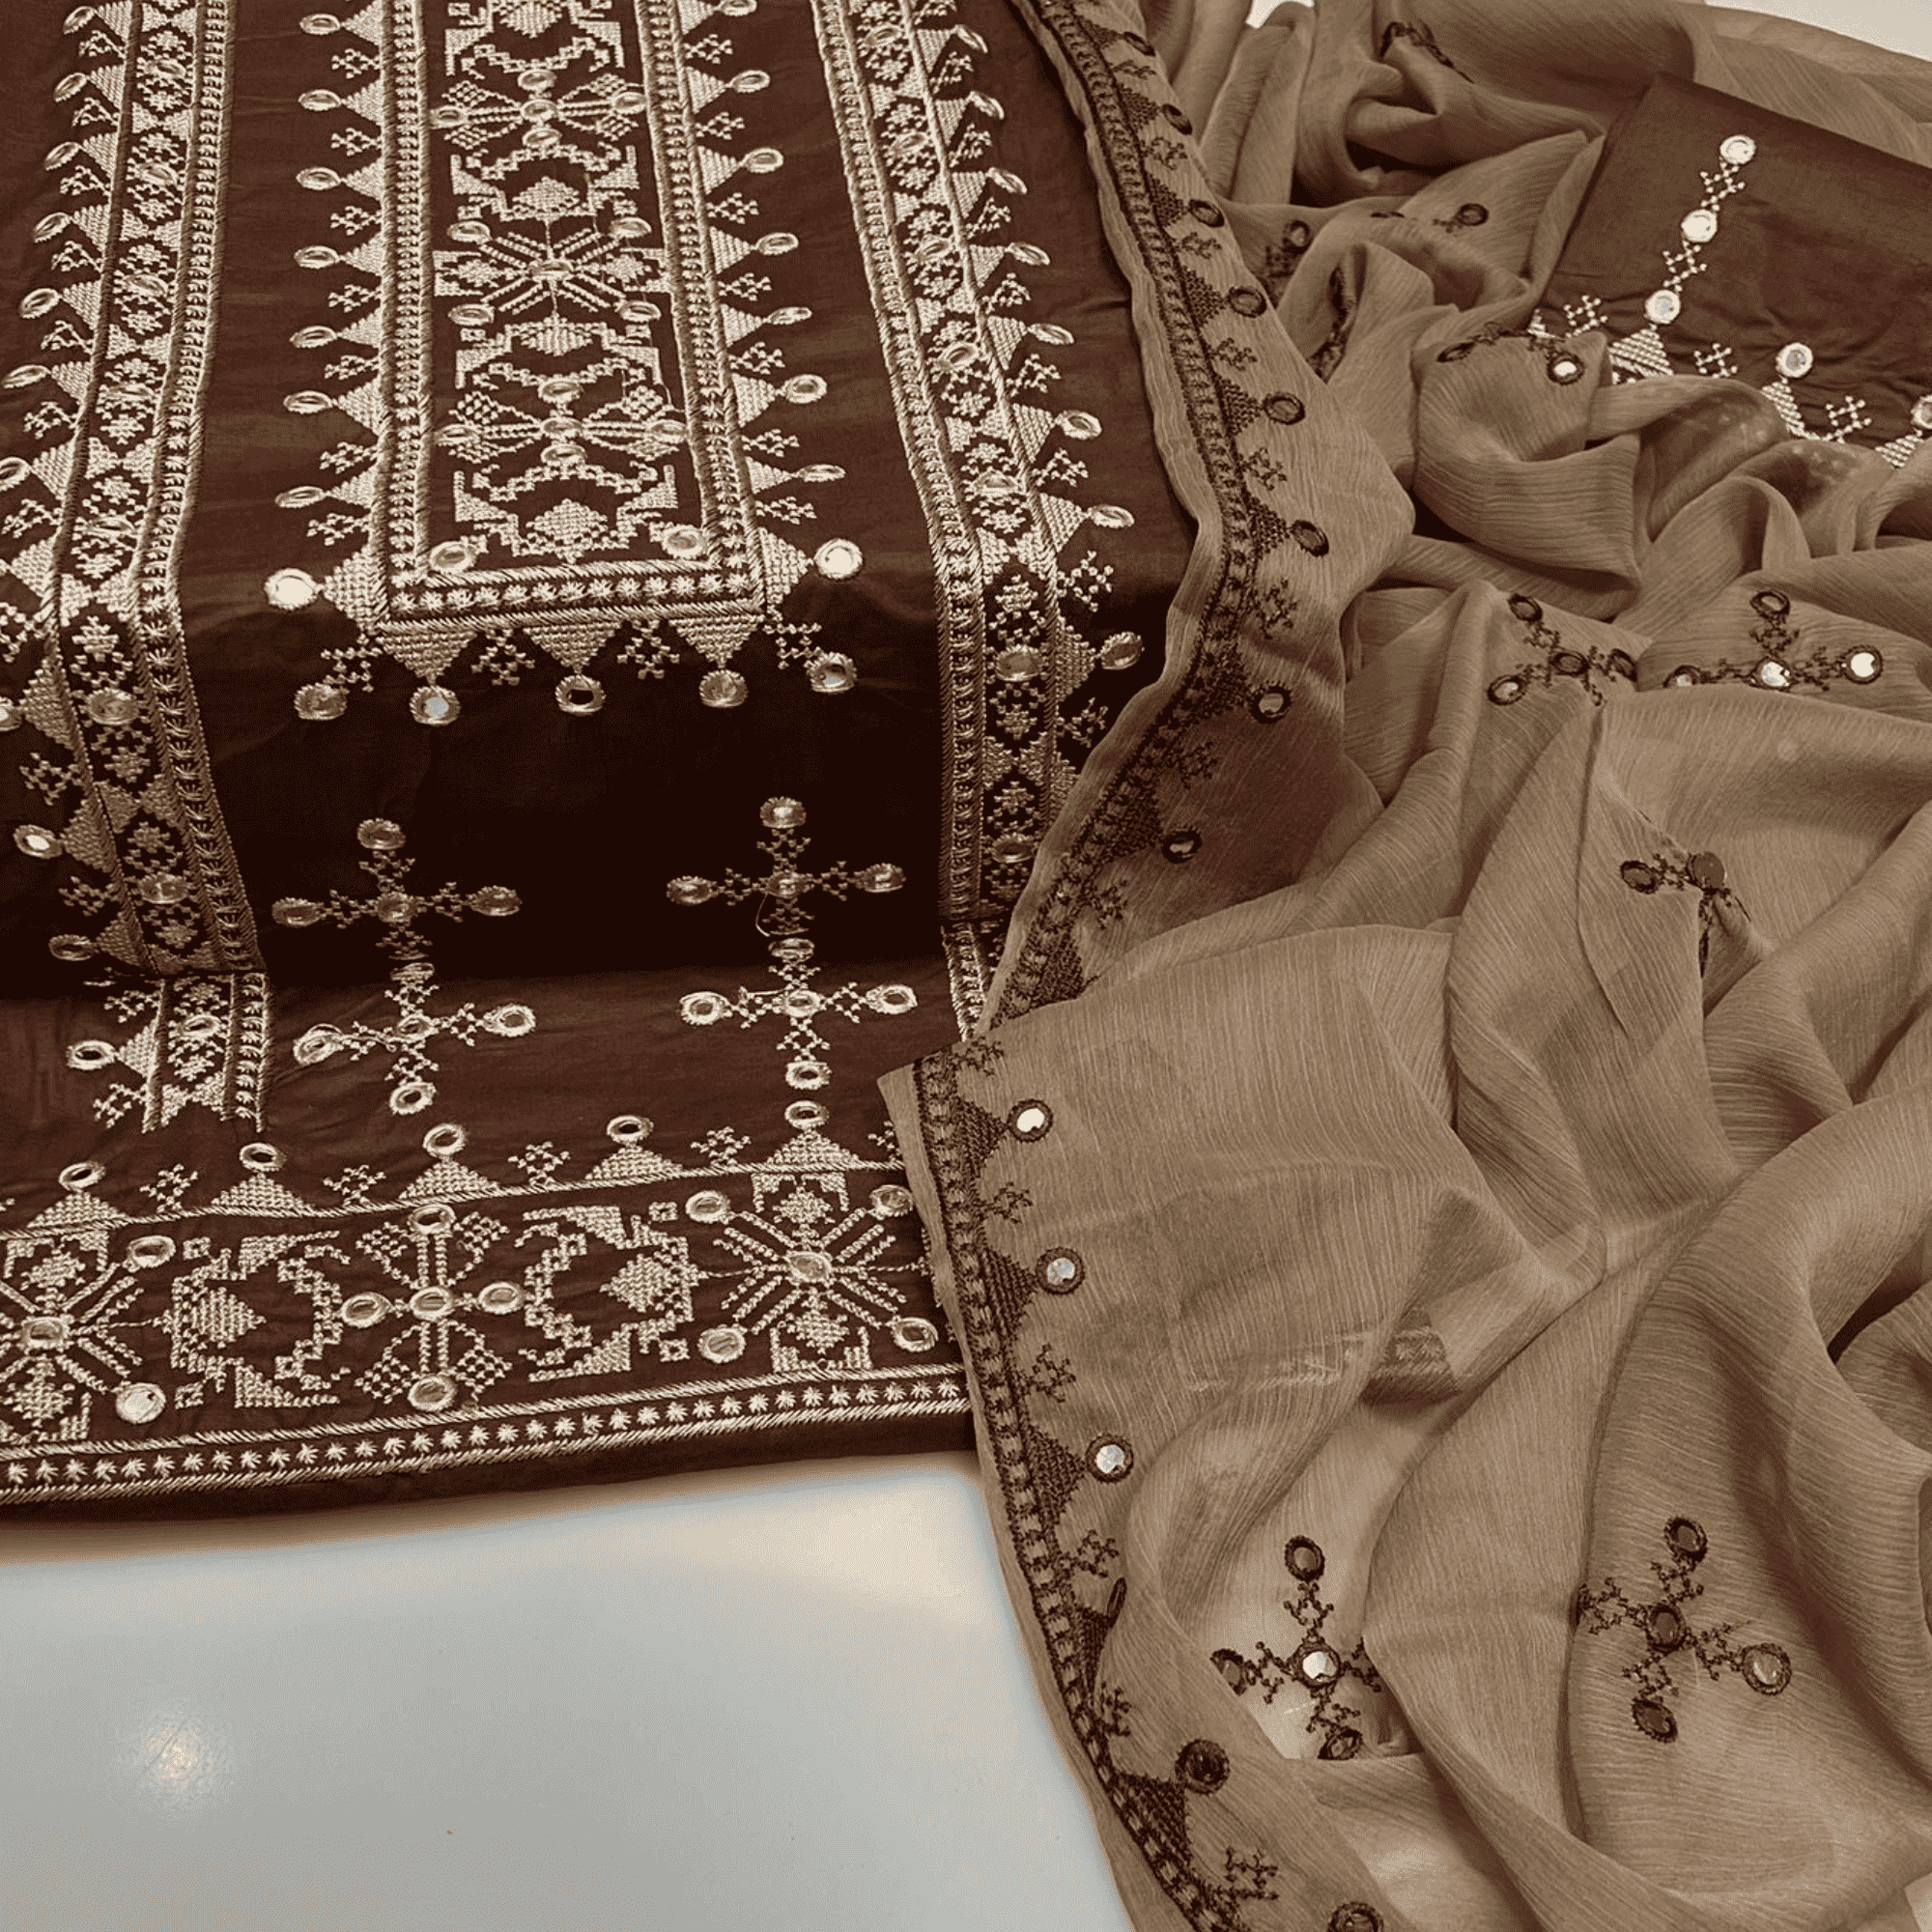 Embroidery girls dresses online in Pakistan and Dubai